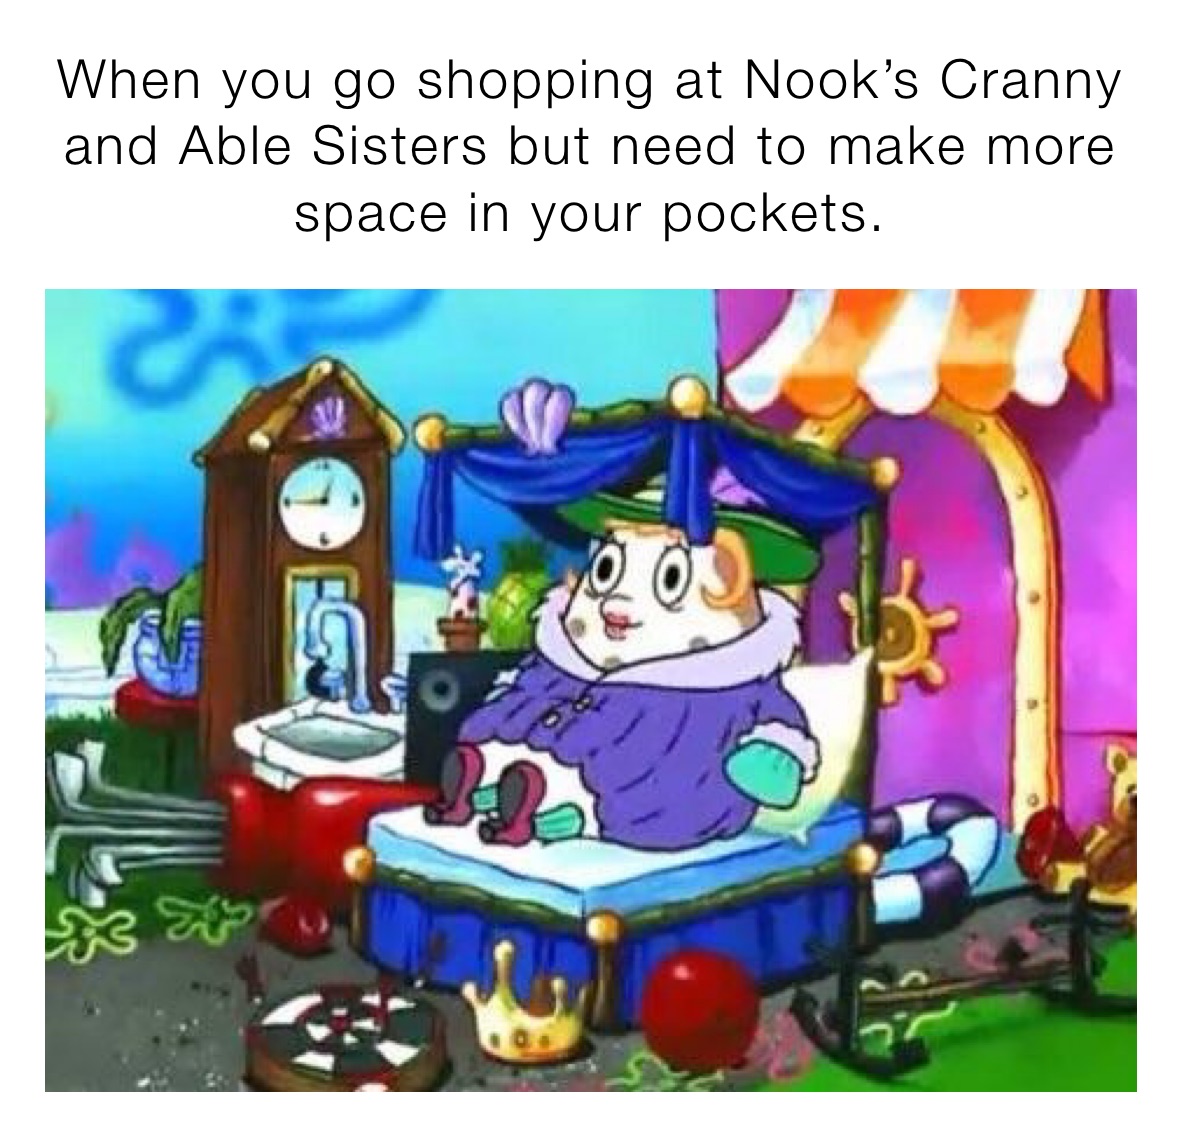 When you go shopping at Nook’s Cranny and Able Sisters but need to make more space in your pockets. 